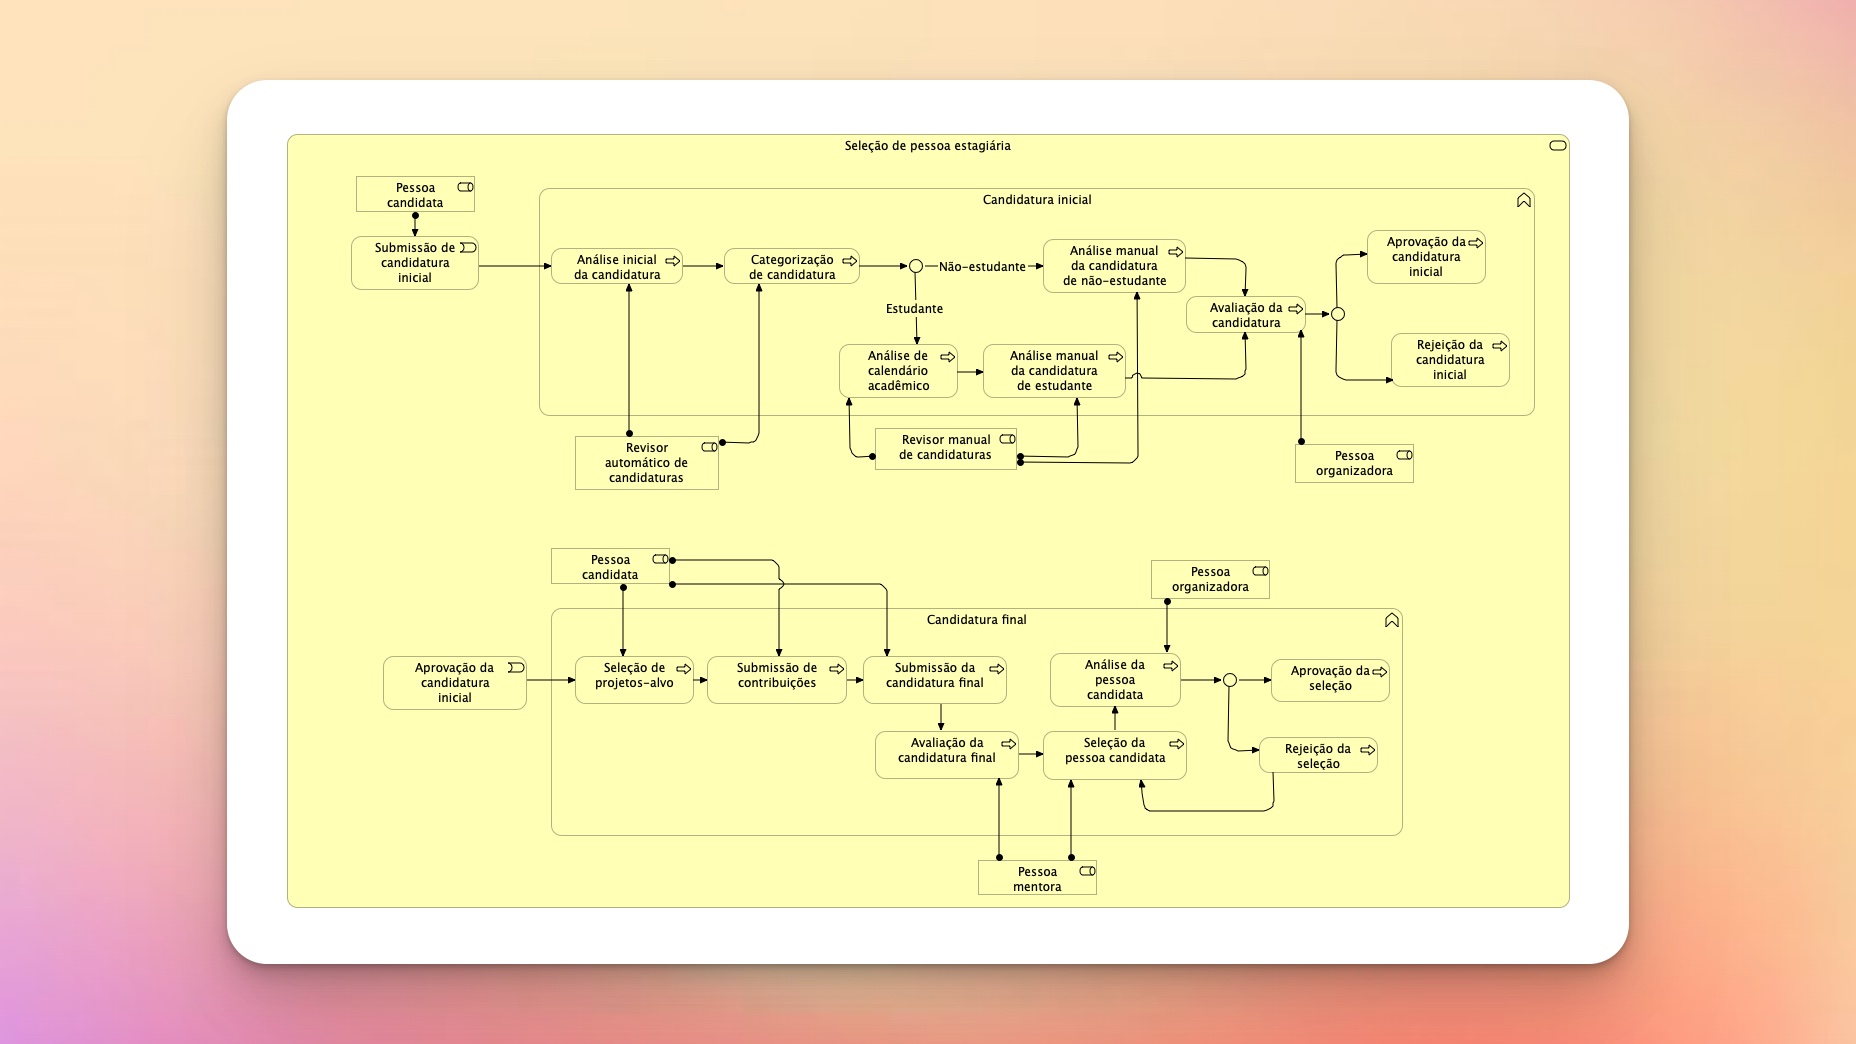 An ArchiMate diagram shows the processes included in the service of selecting applicants for the contribution period.